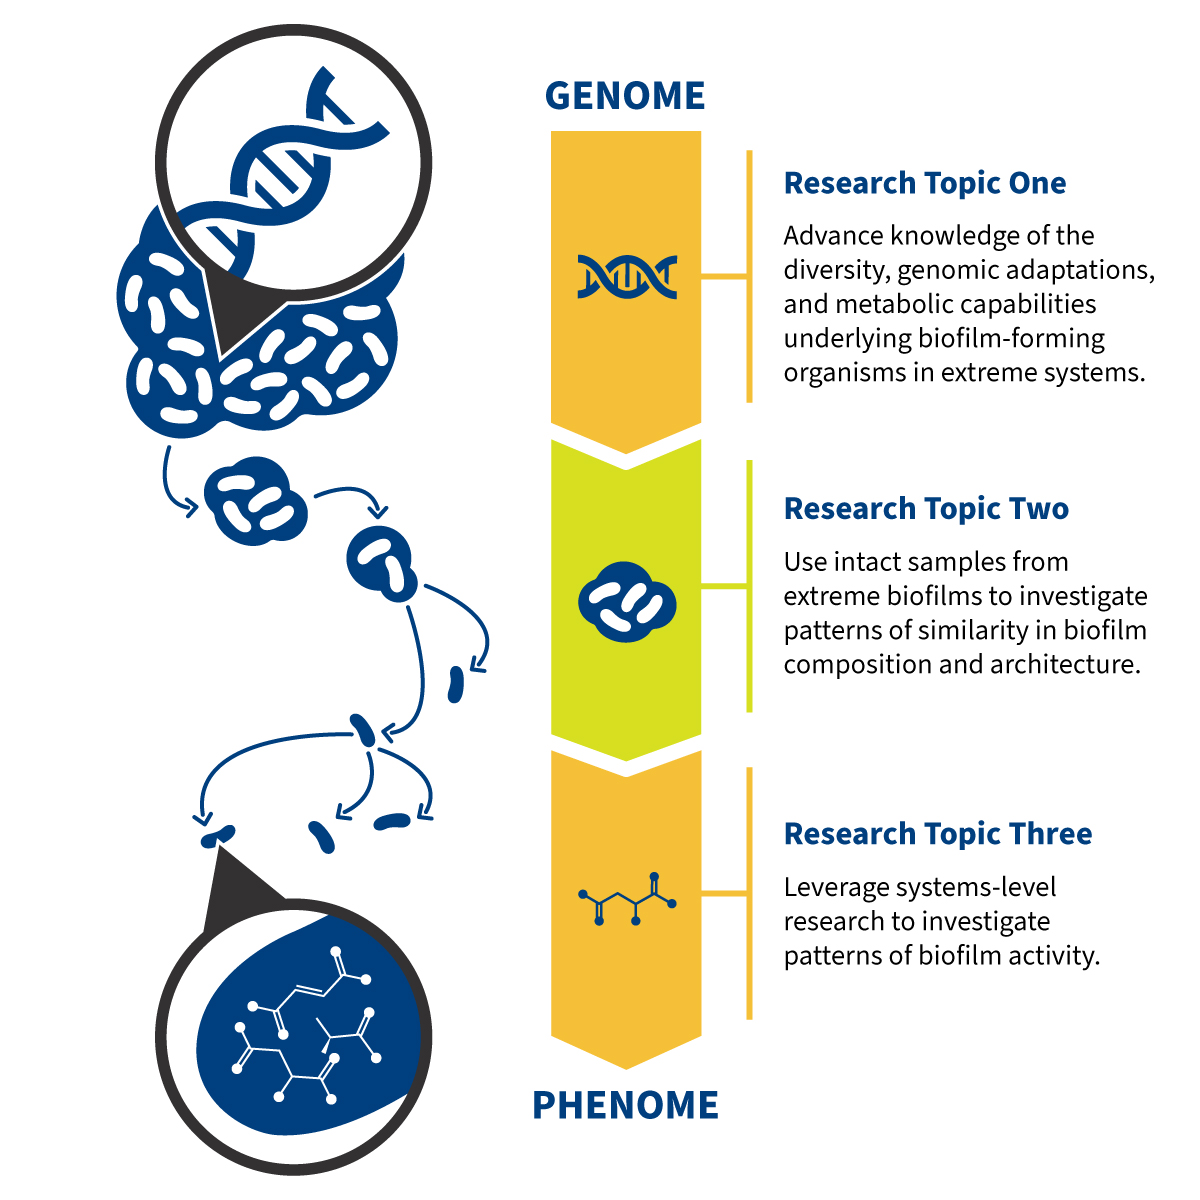 A graphic showing the three research topics of the NRT program. Research topic one explores genomic traits of biofilms, topic two investigates patterns in the composition of biofilm samples, and topic 3 looks into the biofilm’s phenome activity.